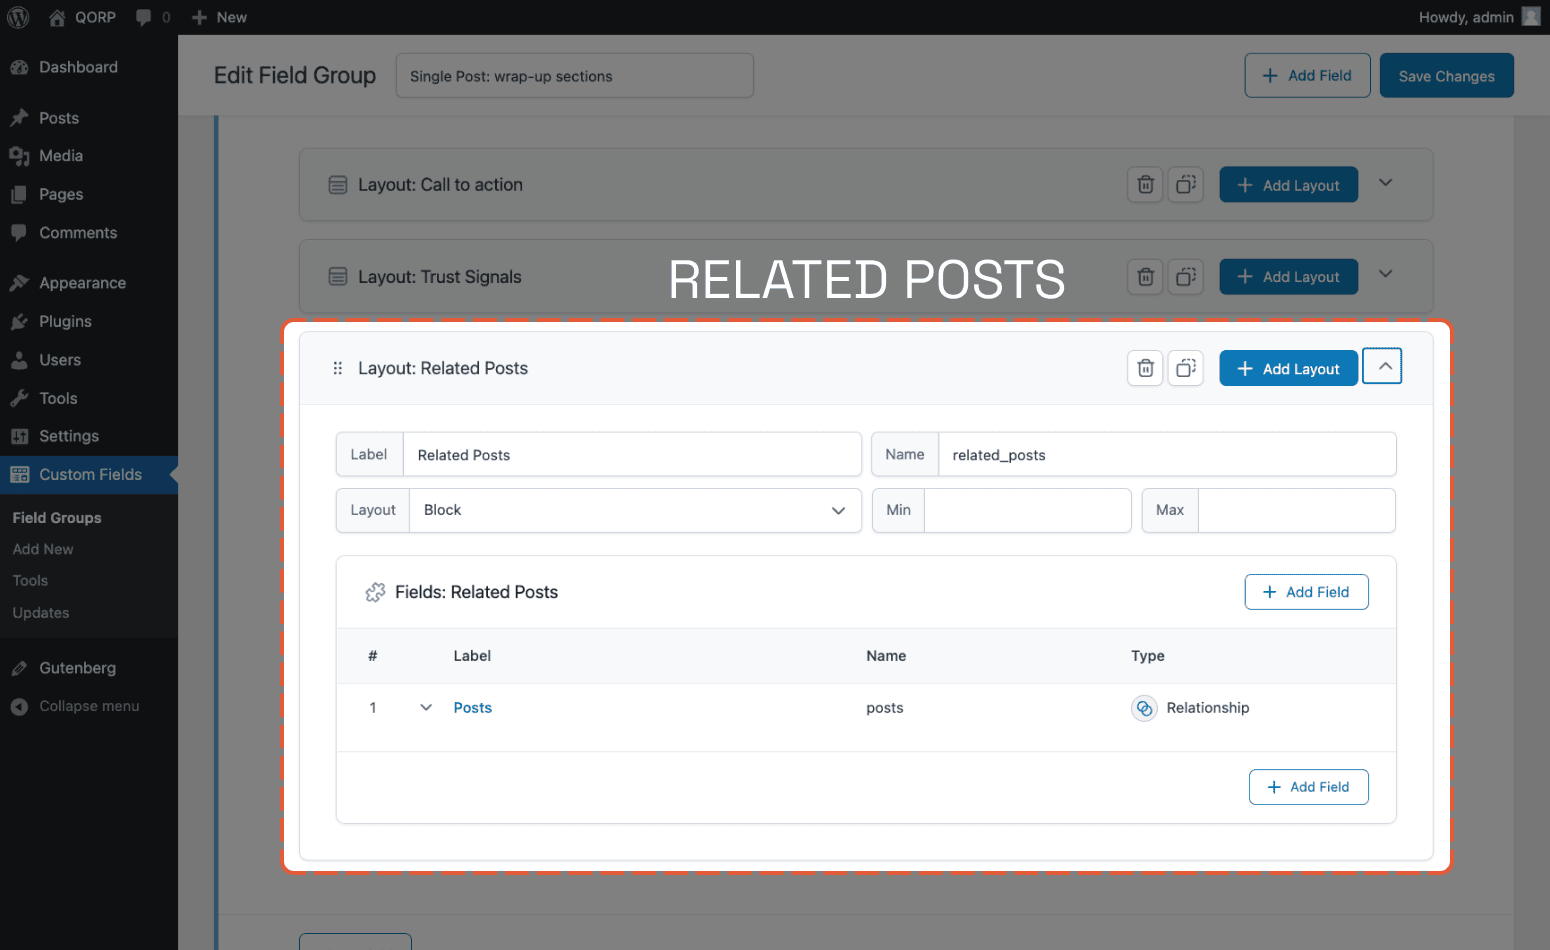 The Flexible Content field for the Related Posts section.